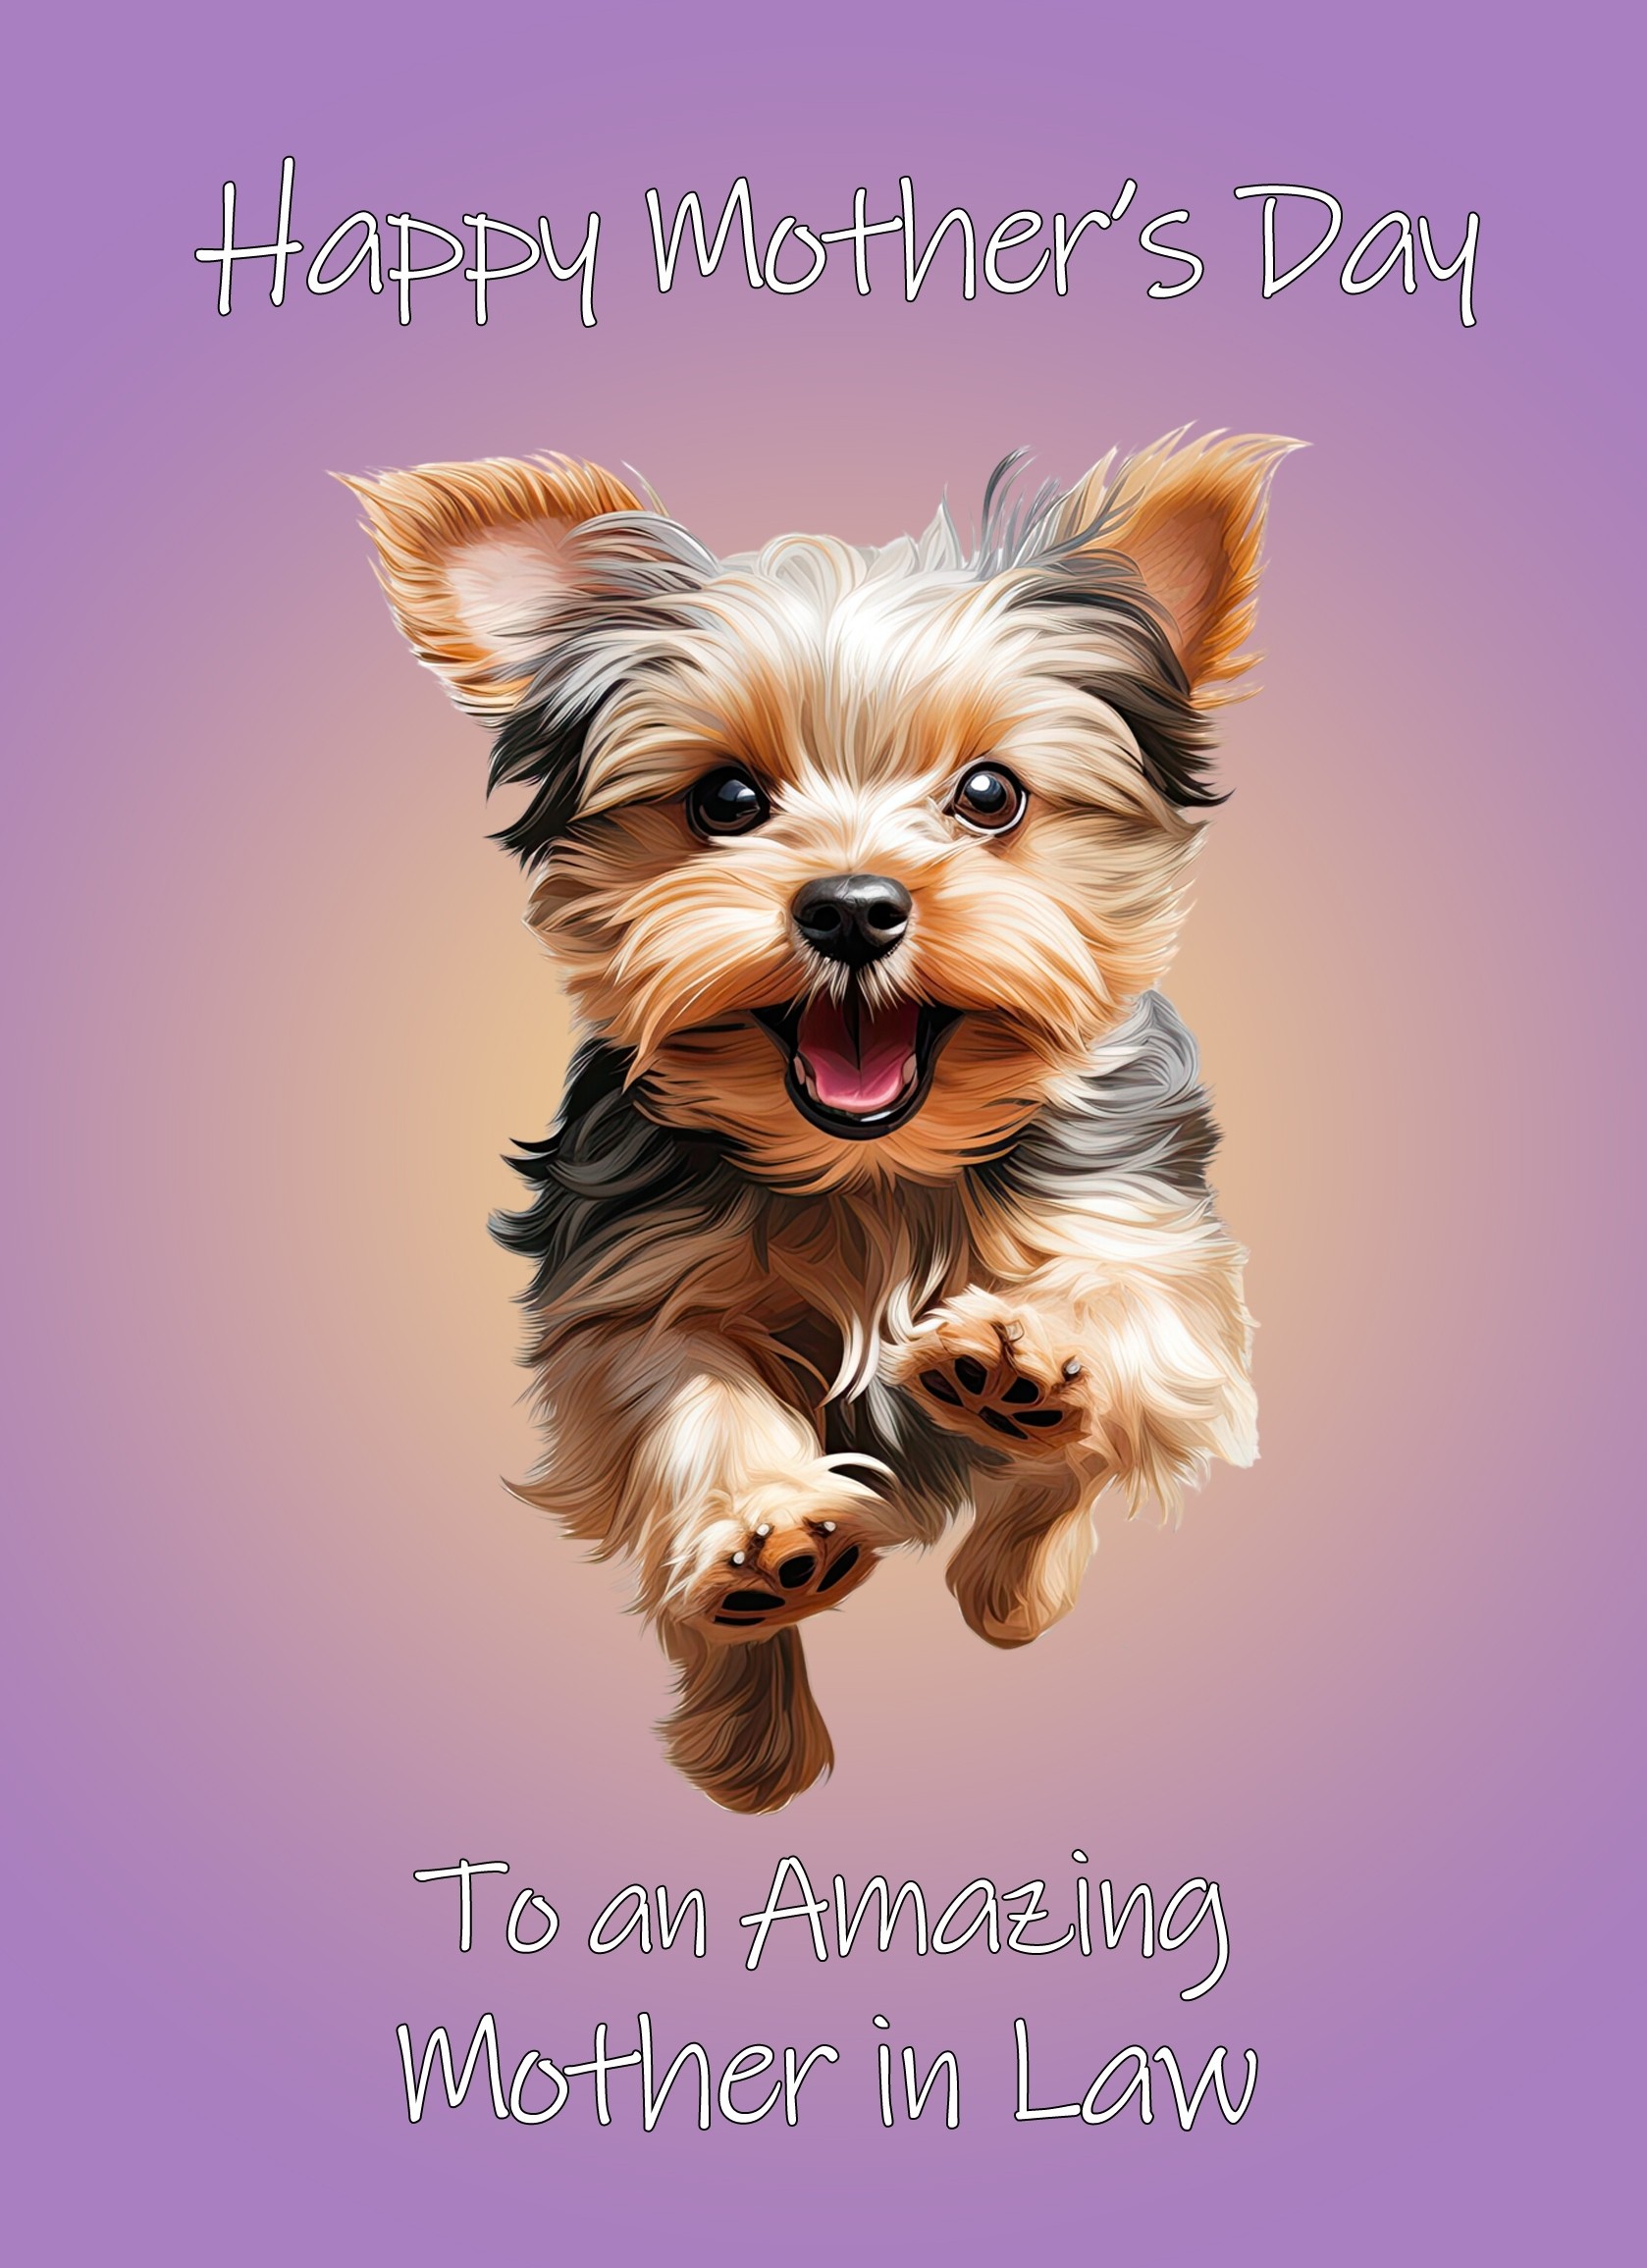 Yorkshire Terrier Dog Mothers Day Card For Mother in Law